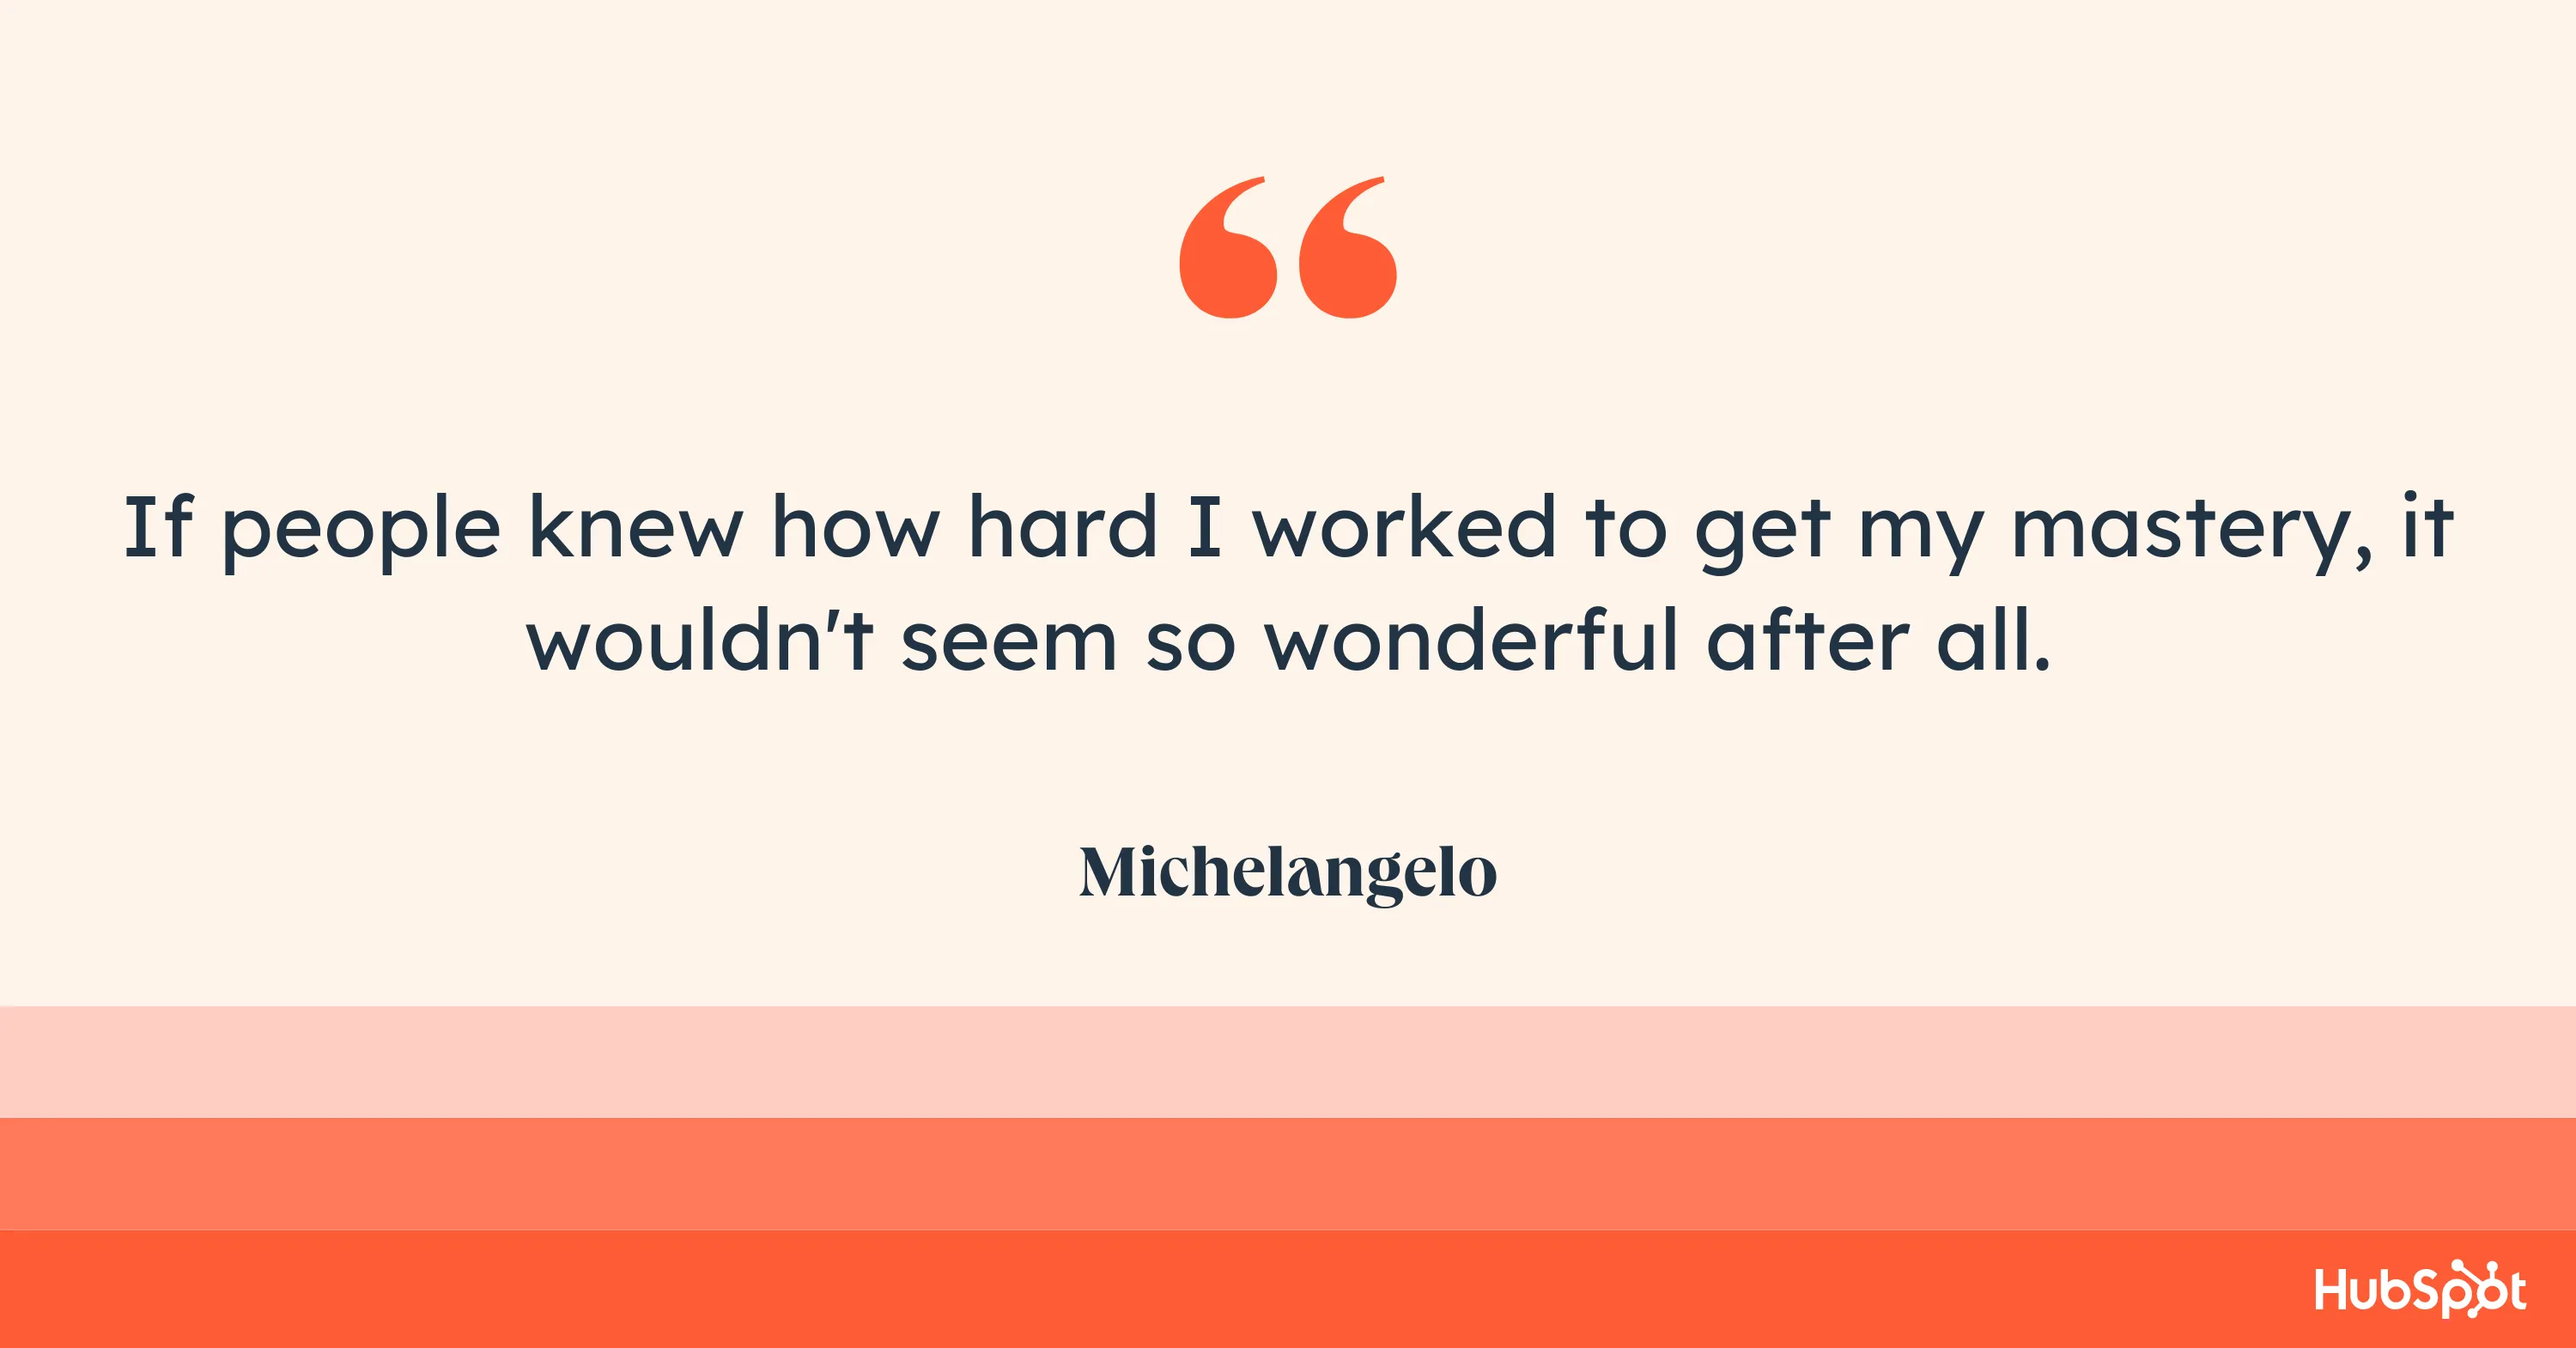 100+ Motivational Quotes About Hard Work That'll Help You Reach Your Goals